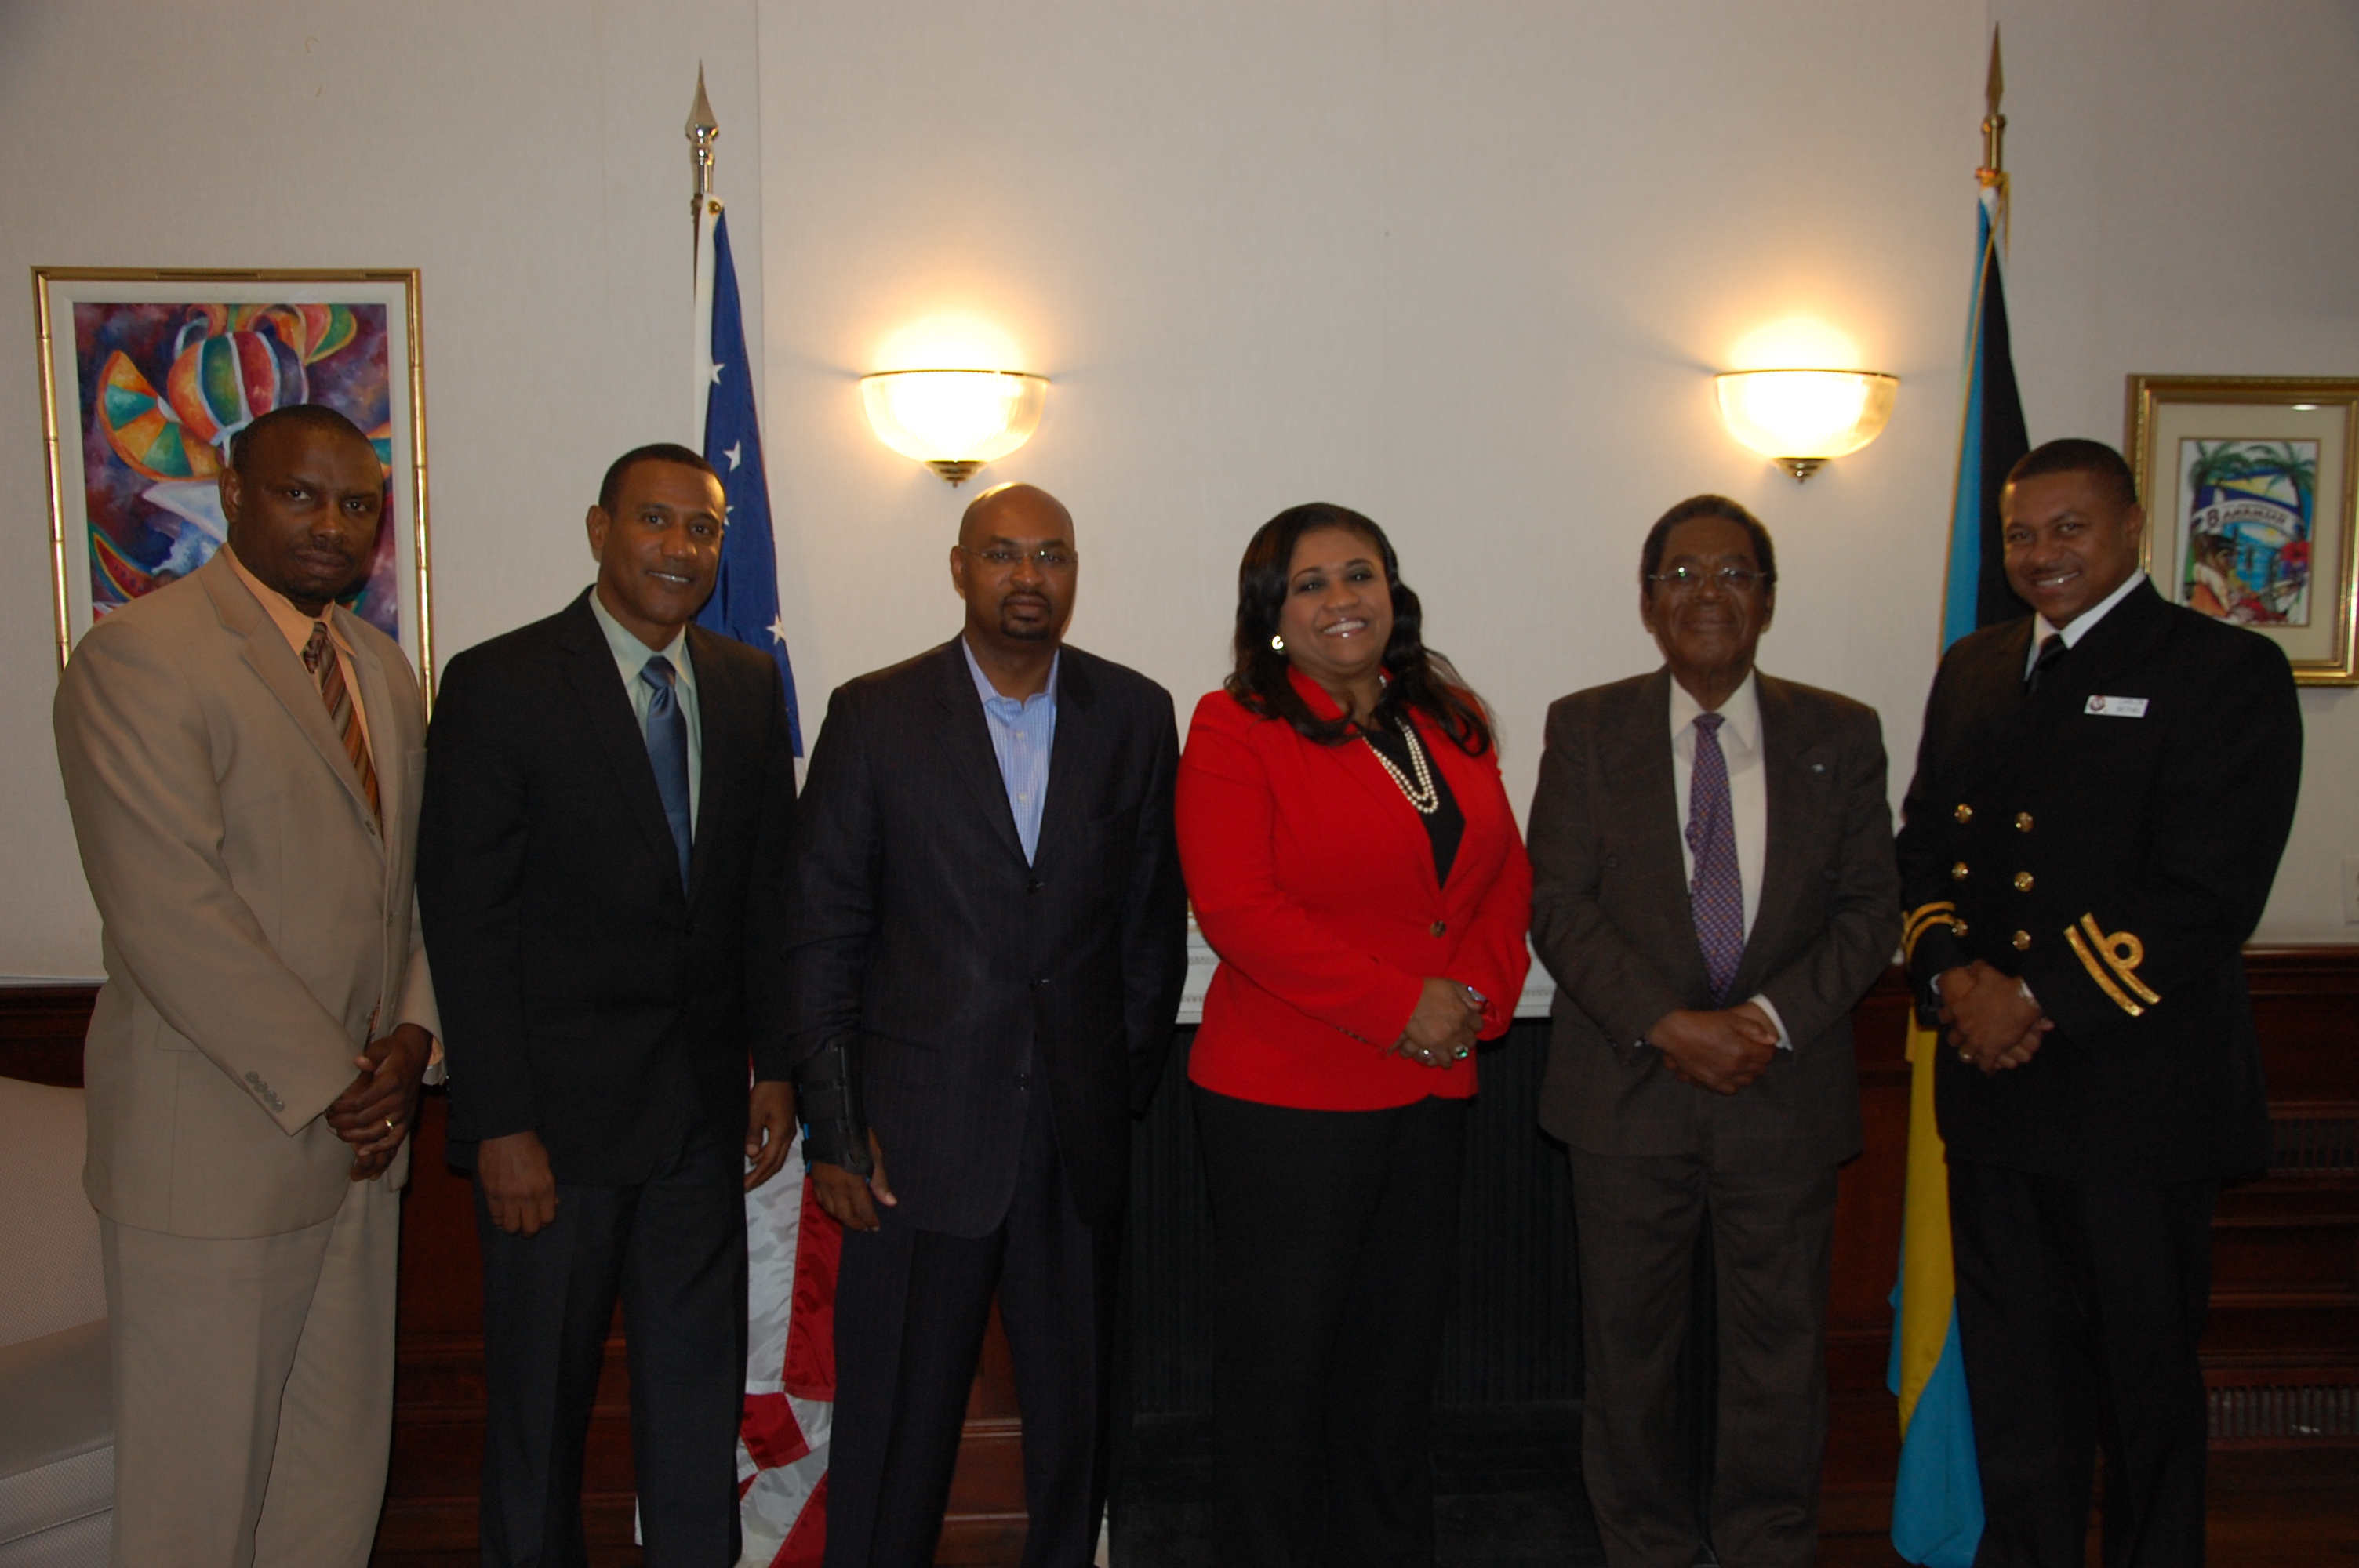 Two high-ranking officers of the Royal Bahamas Defence Force (RBDF) and an information specialist with the Ministry of Finance who were taking security-related courses in Washington, D.C., visited the Bahamas Embassy